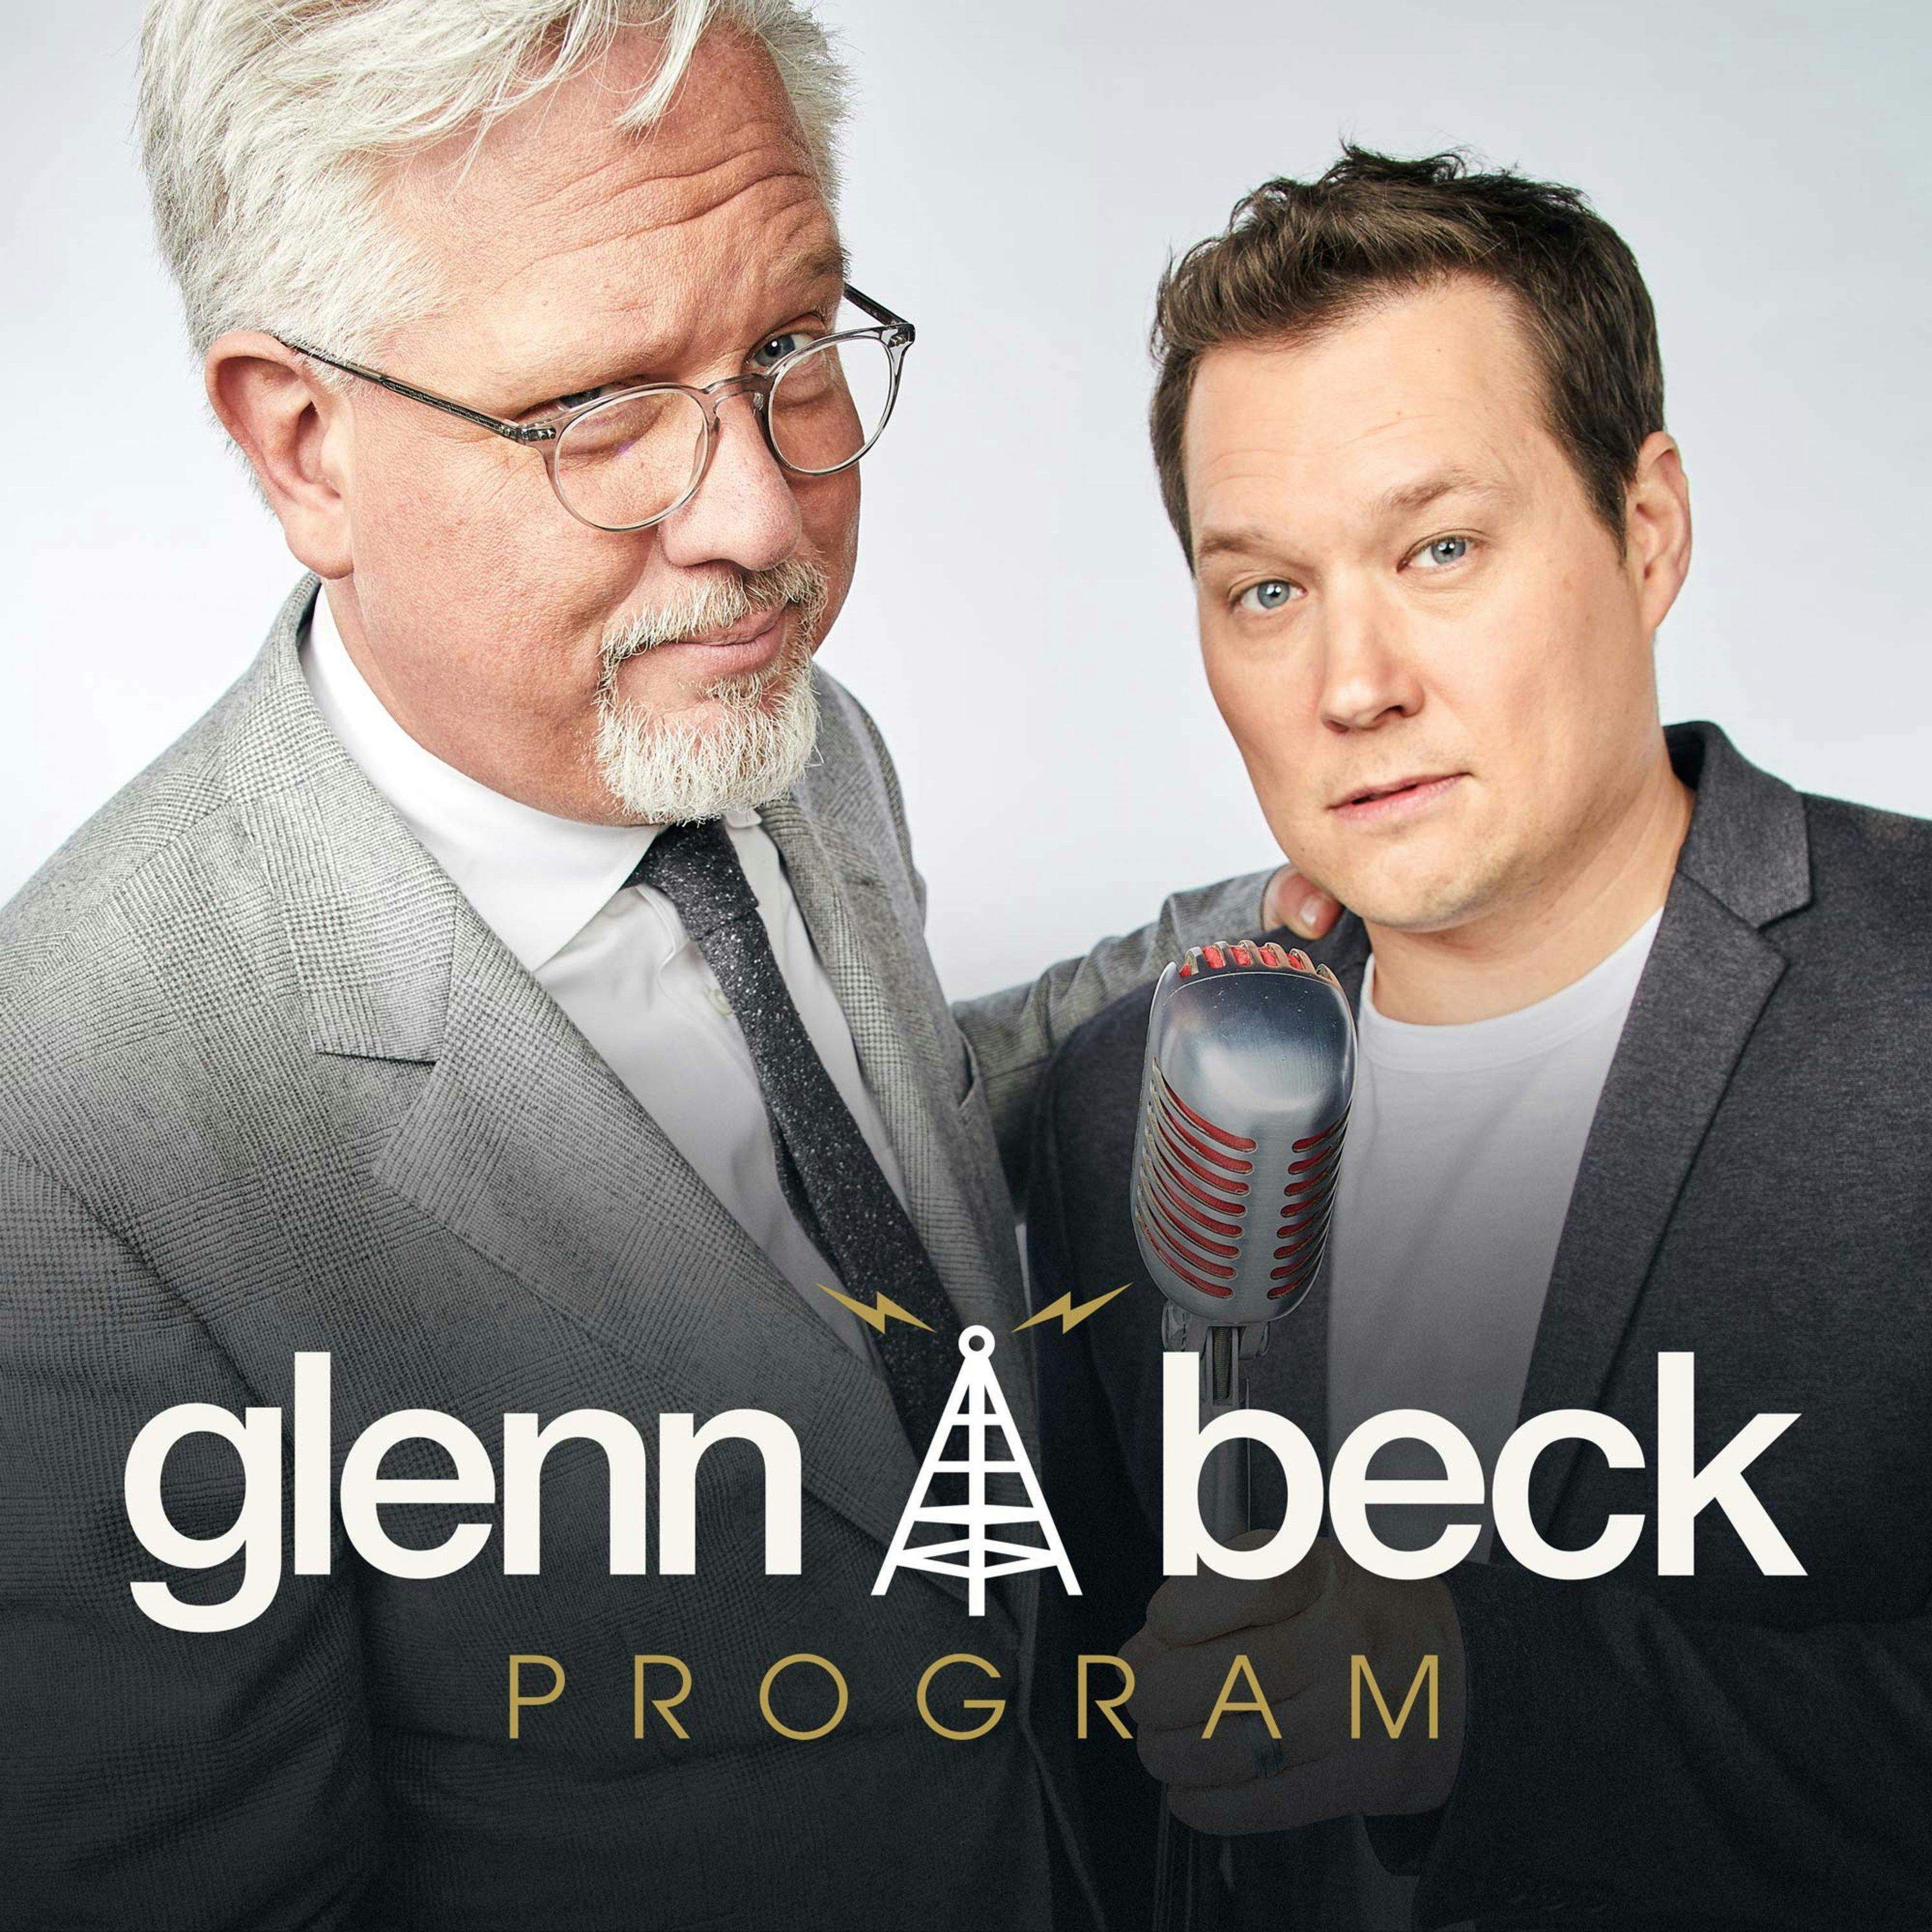 5/4/17 – Glenn shares lessons learned with Stephen Colbert (Aaron Watson Stops By)